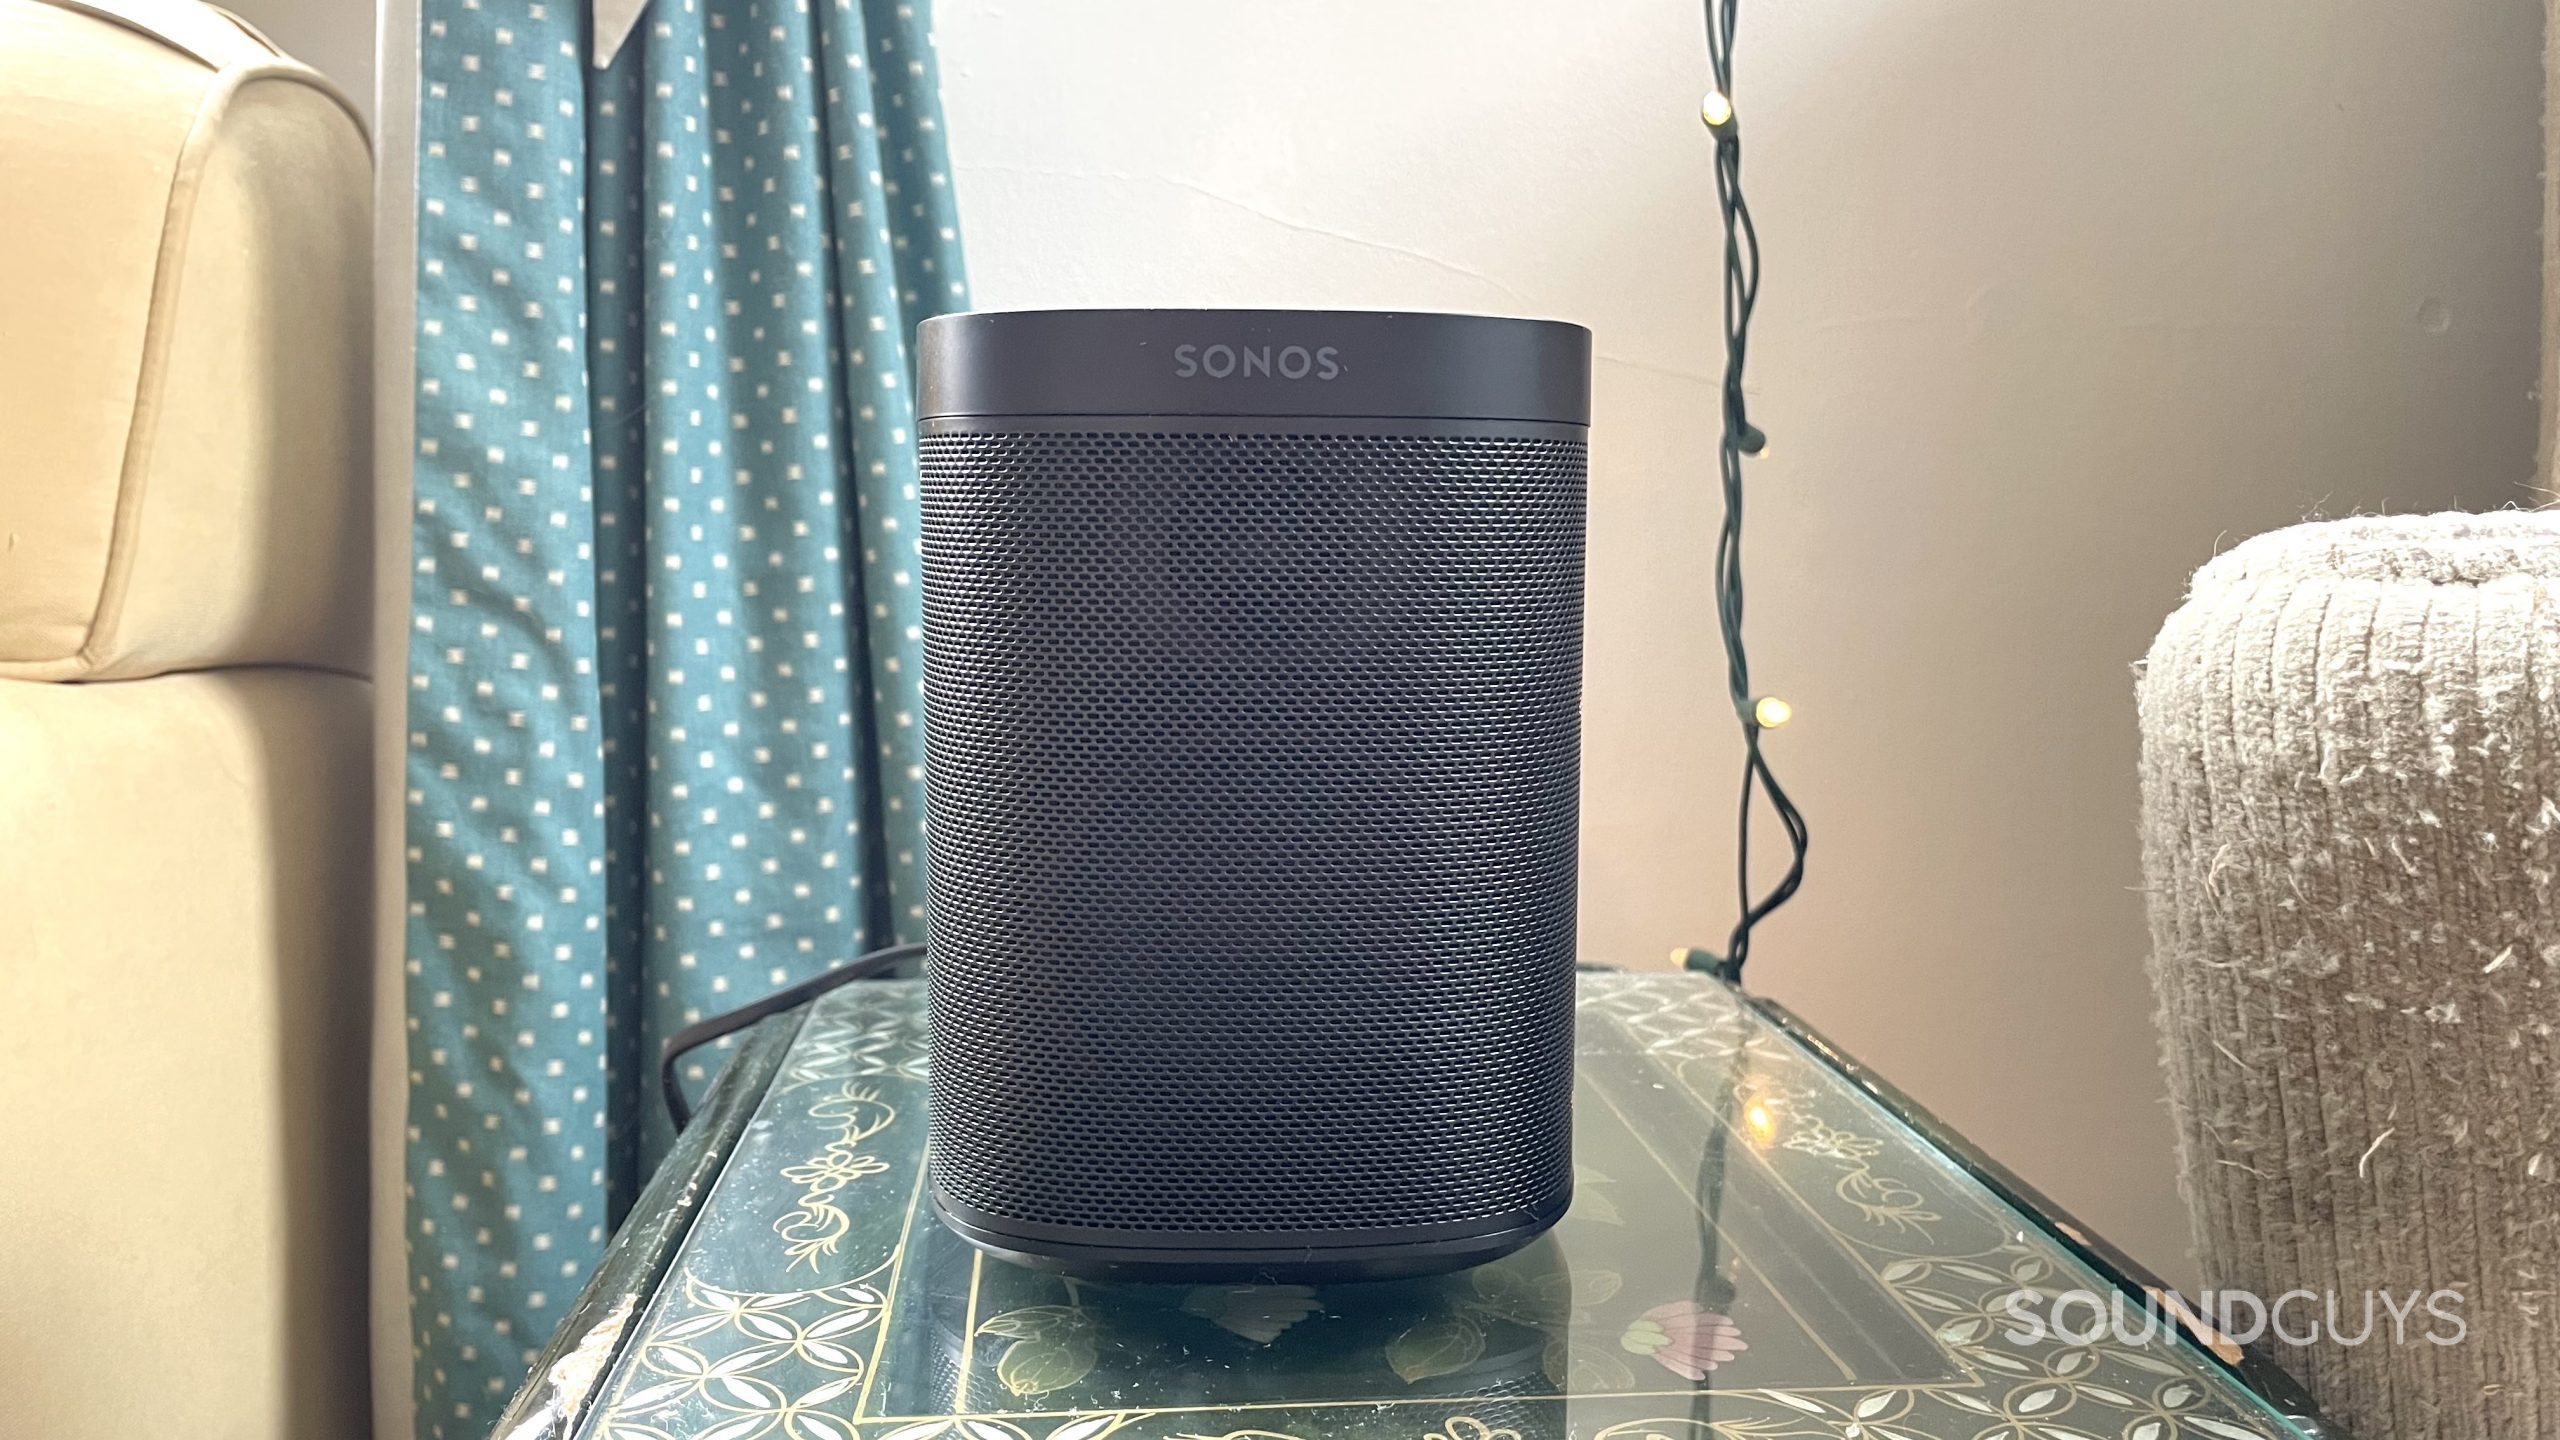 Sonos One Gen 2) on a side table with curtains and string lights in the background.